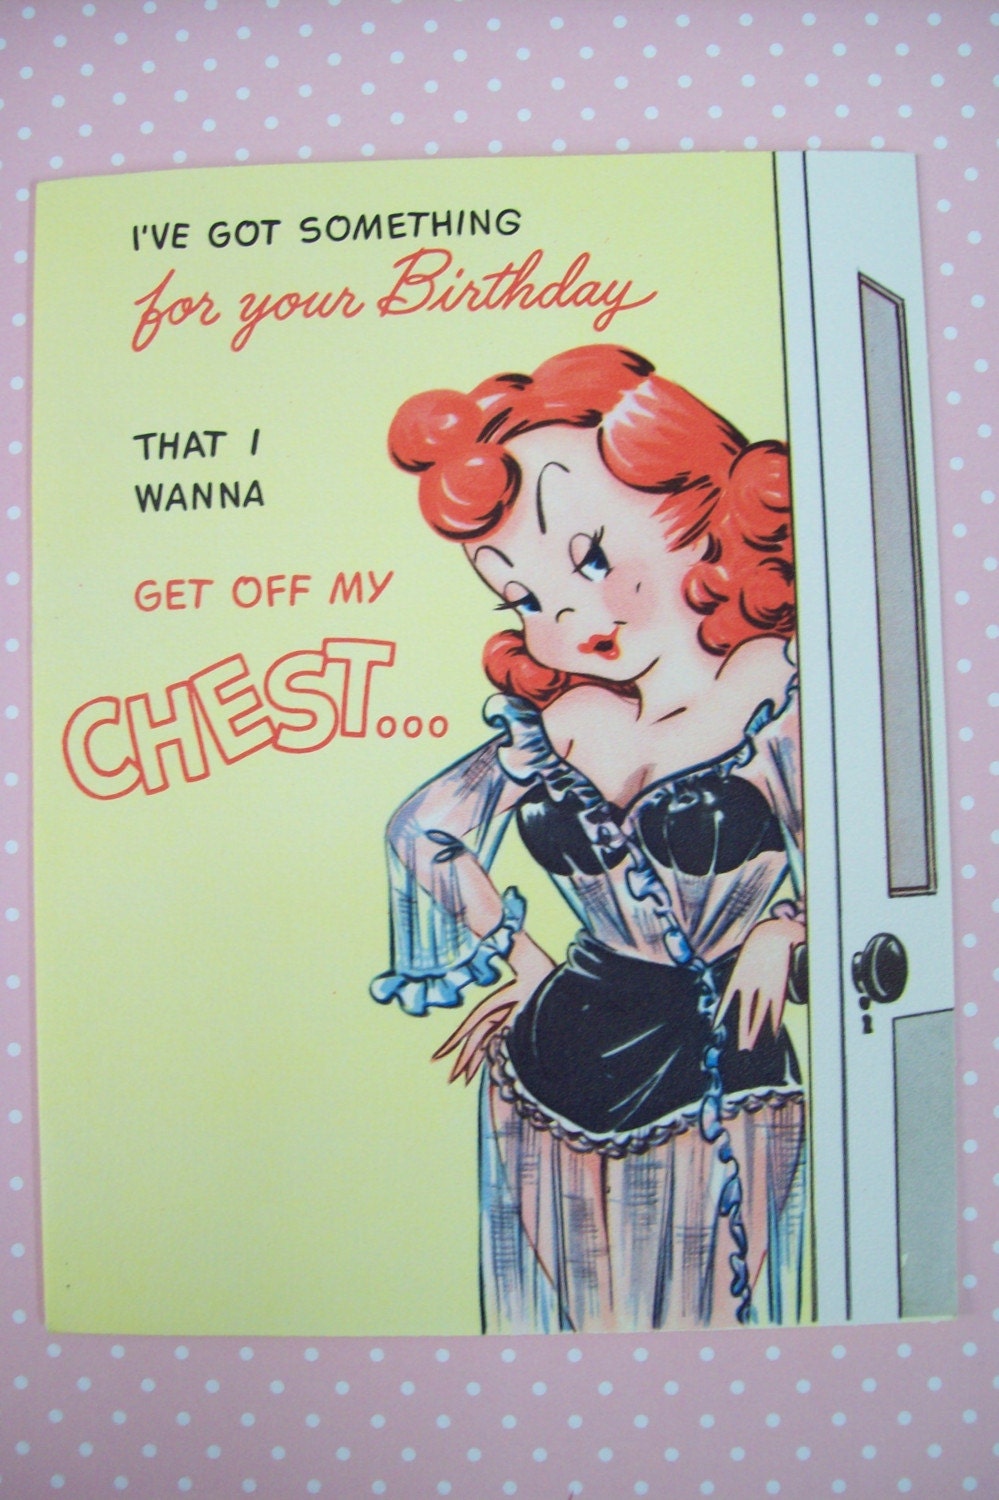 Vintage Risque Birthday Card By Magnoliavintage On Etsy